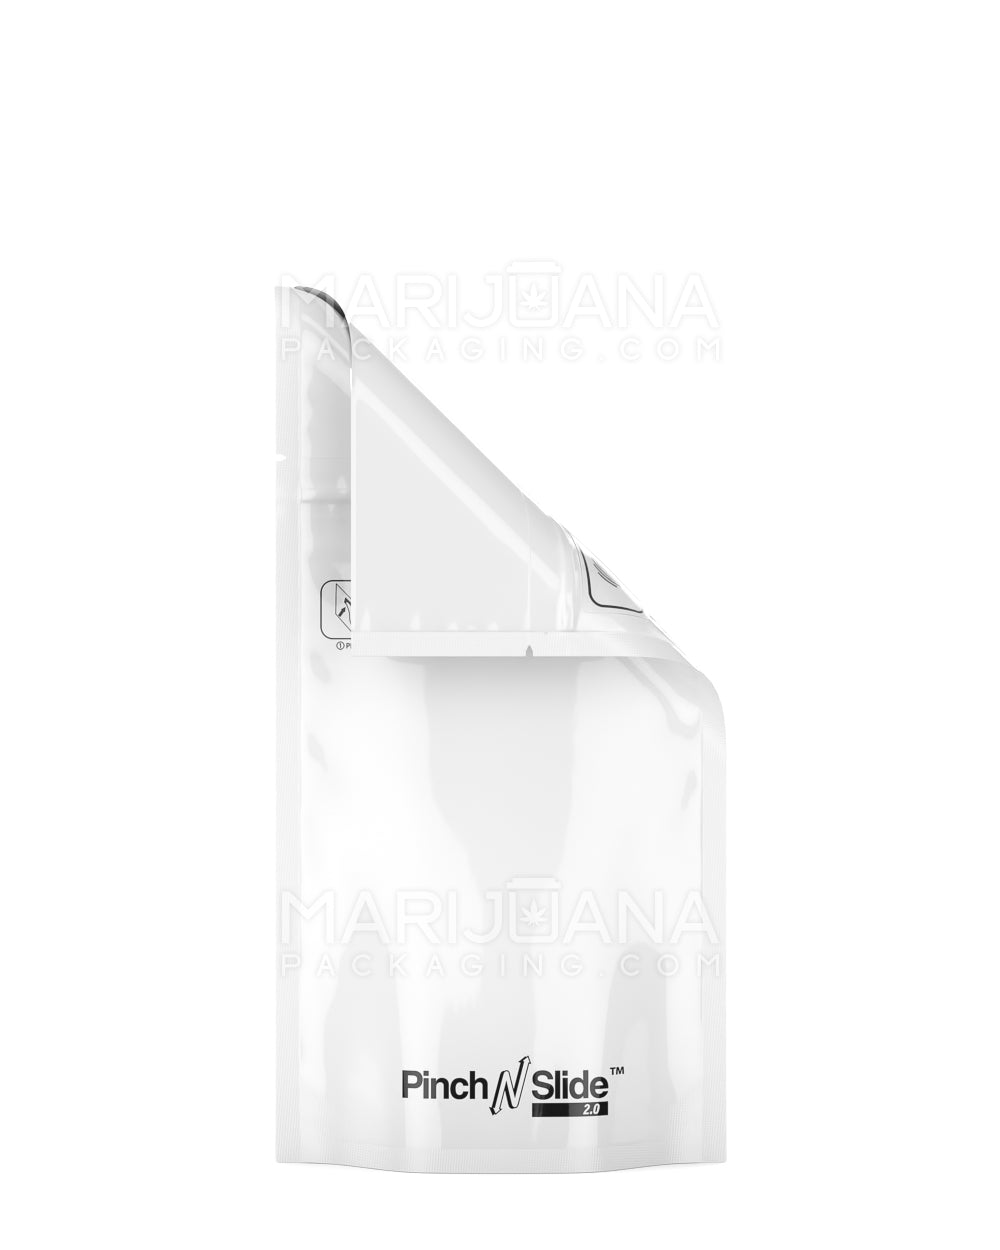 Child Resistant & Tamper Evident | Pinch N Slide 2.0 White Mylar Bags | 3.5in x 5in - 3.5g - 250 Count - 3